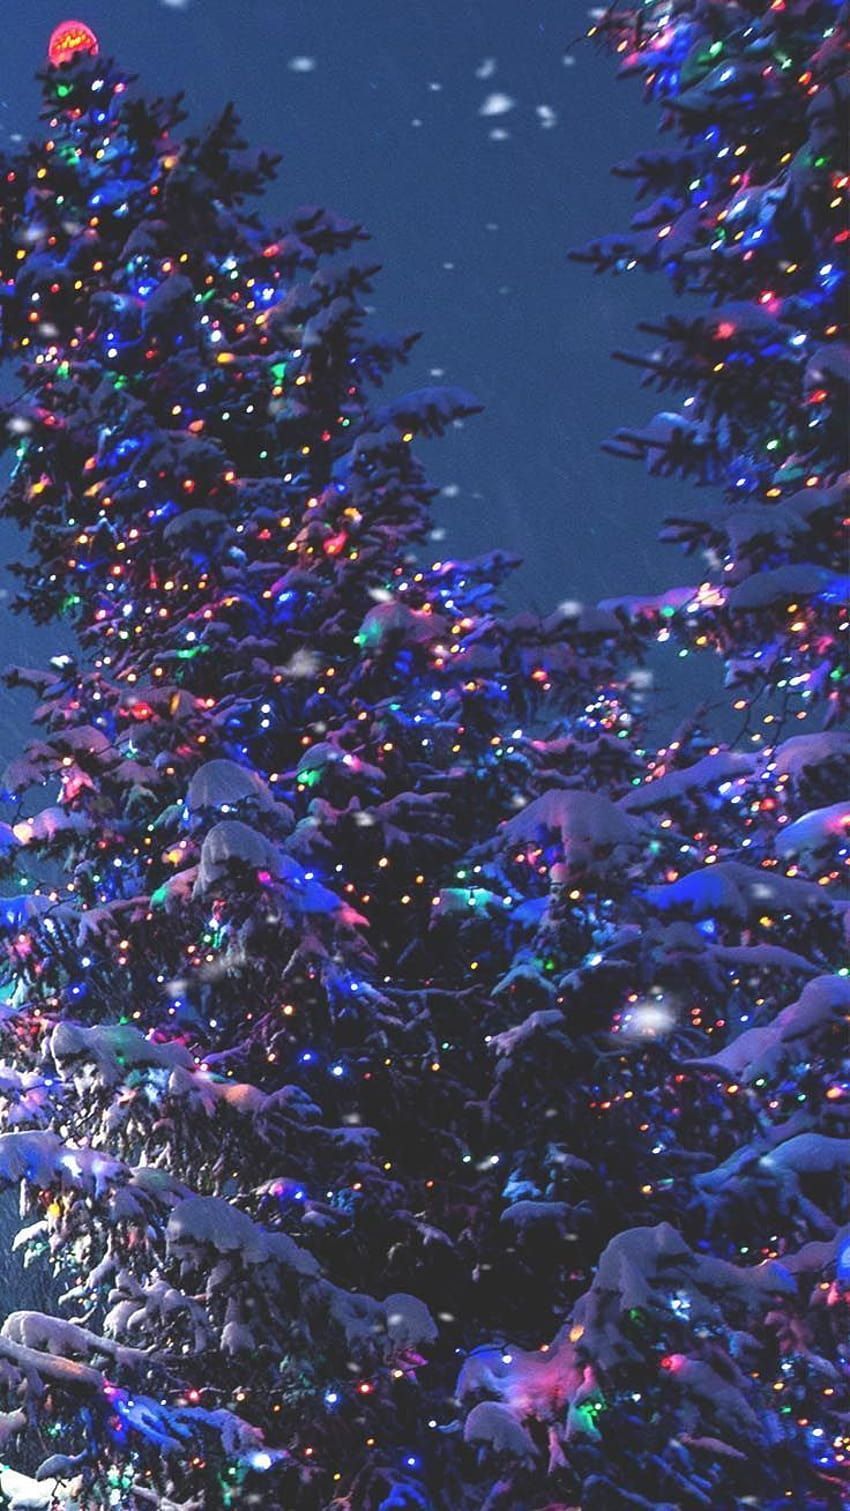 A snowy Christmas tree with colorful lights - Christmas iPhone